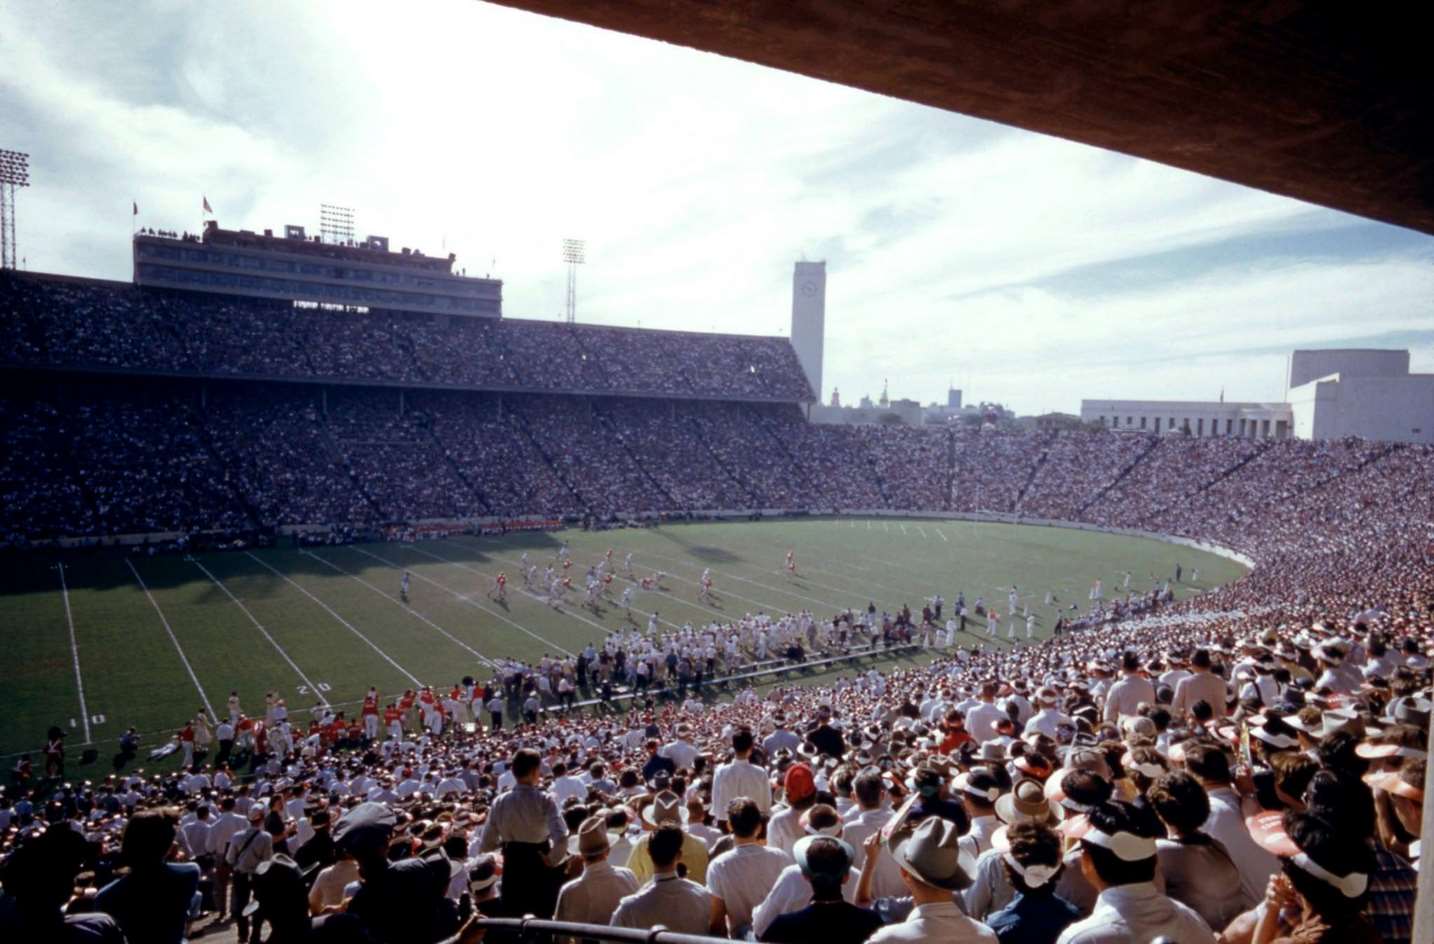 General view as fans look on during the Red River Rivalry between the #3 ranked Oklahoma Sooners and Texas Longhorns on October 8, 1955 at the Cotton Bowl in Dallas, Texas.